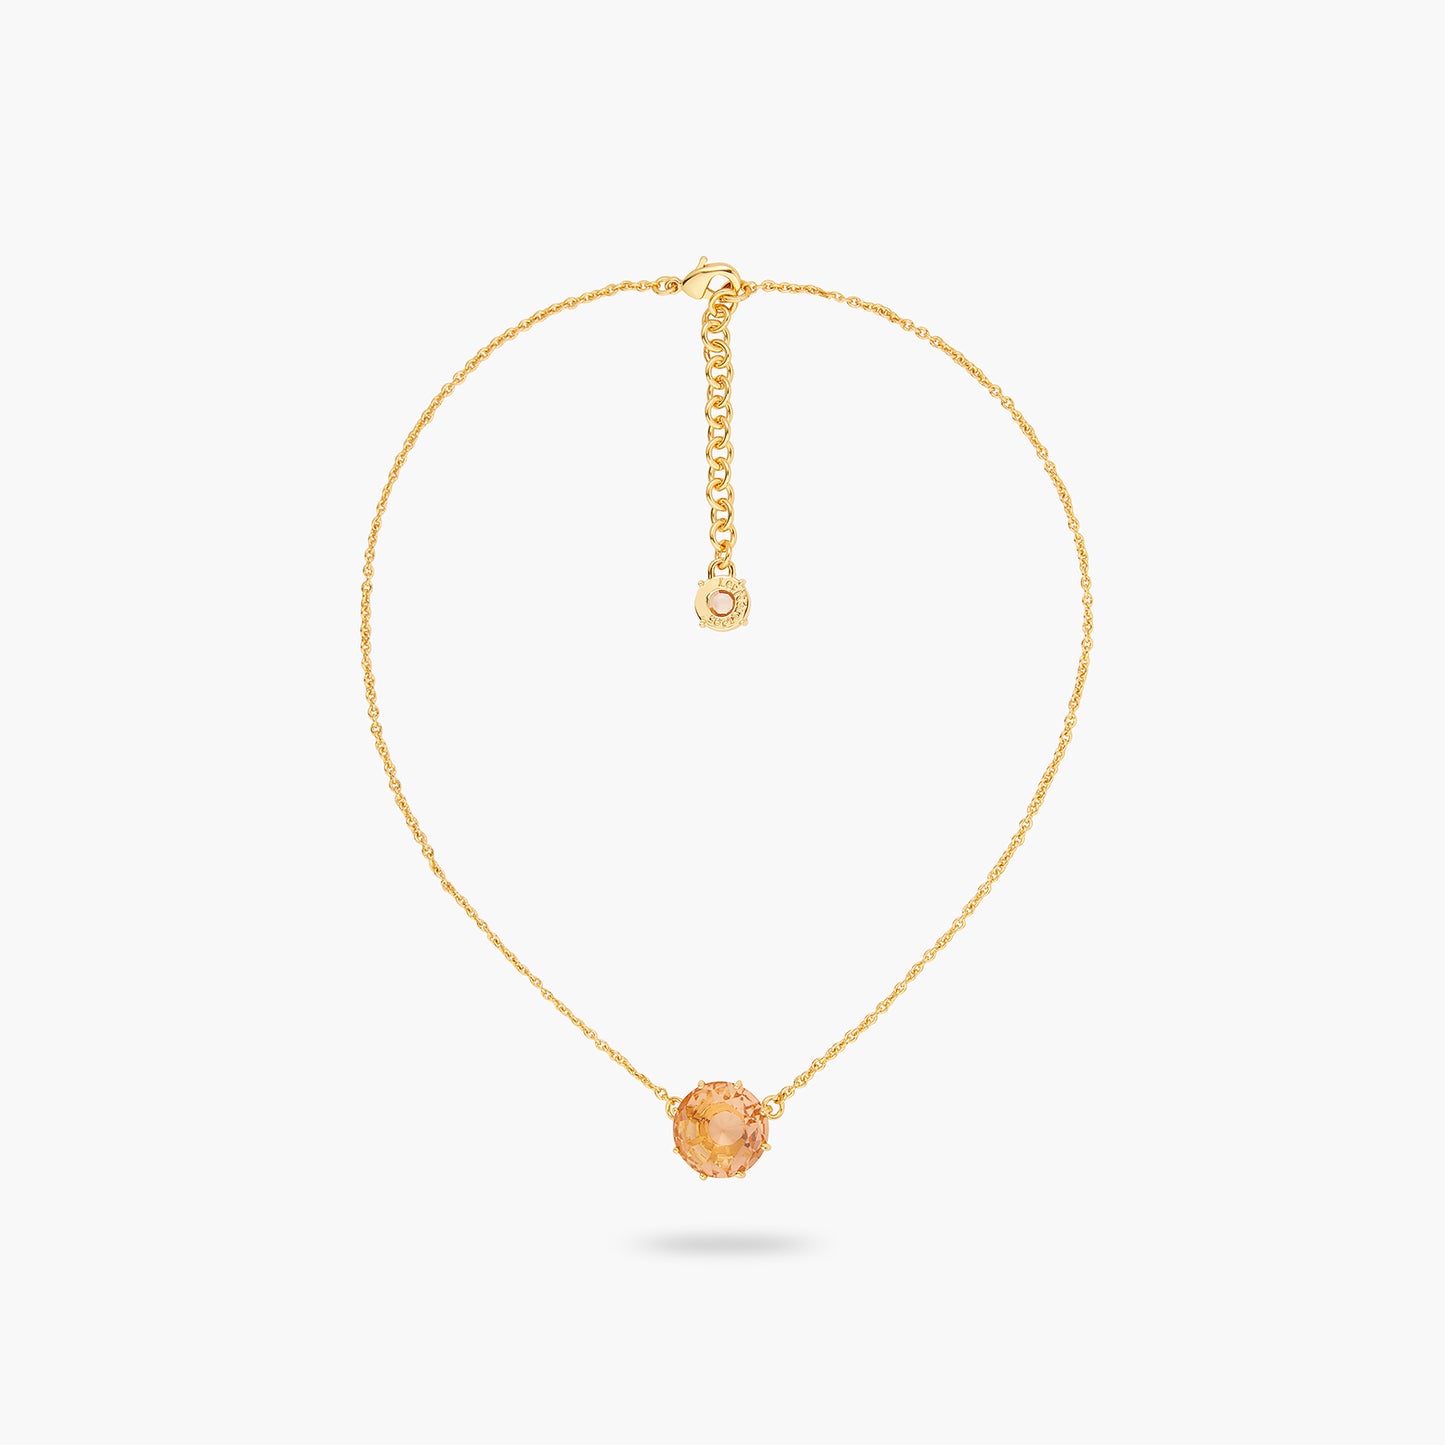 Apricot Pink Diamantine Flower And Round Stone Fine Necklace | ATLD3012